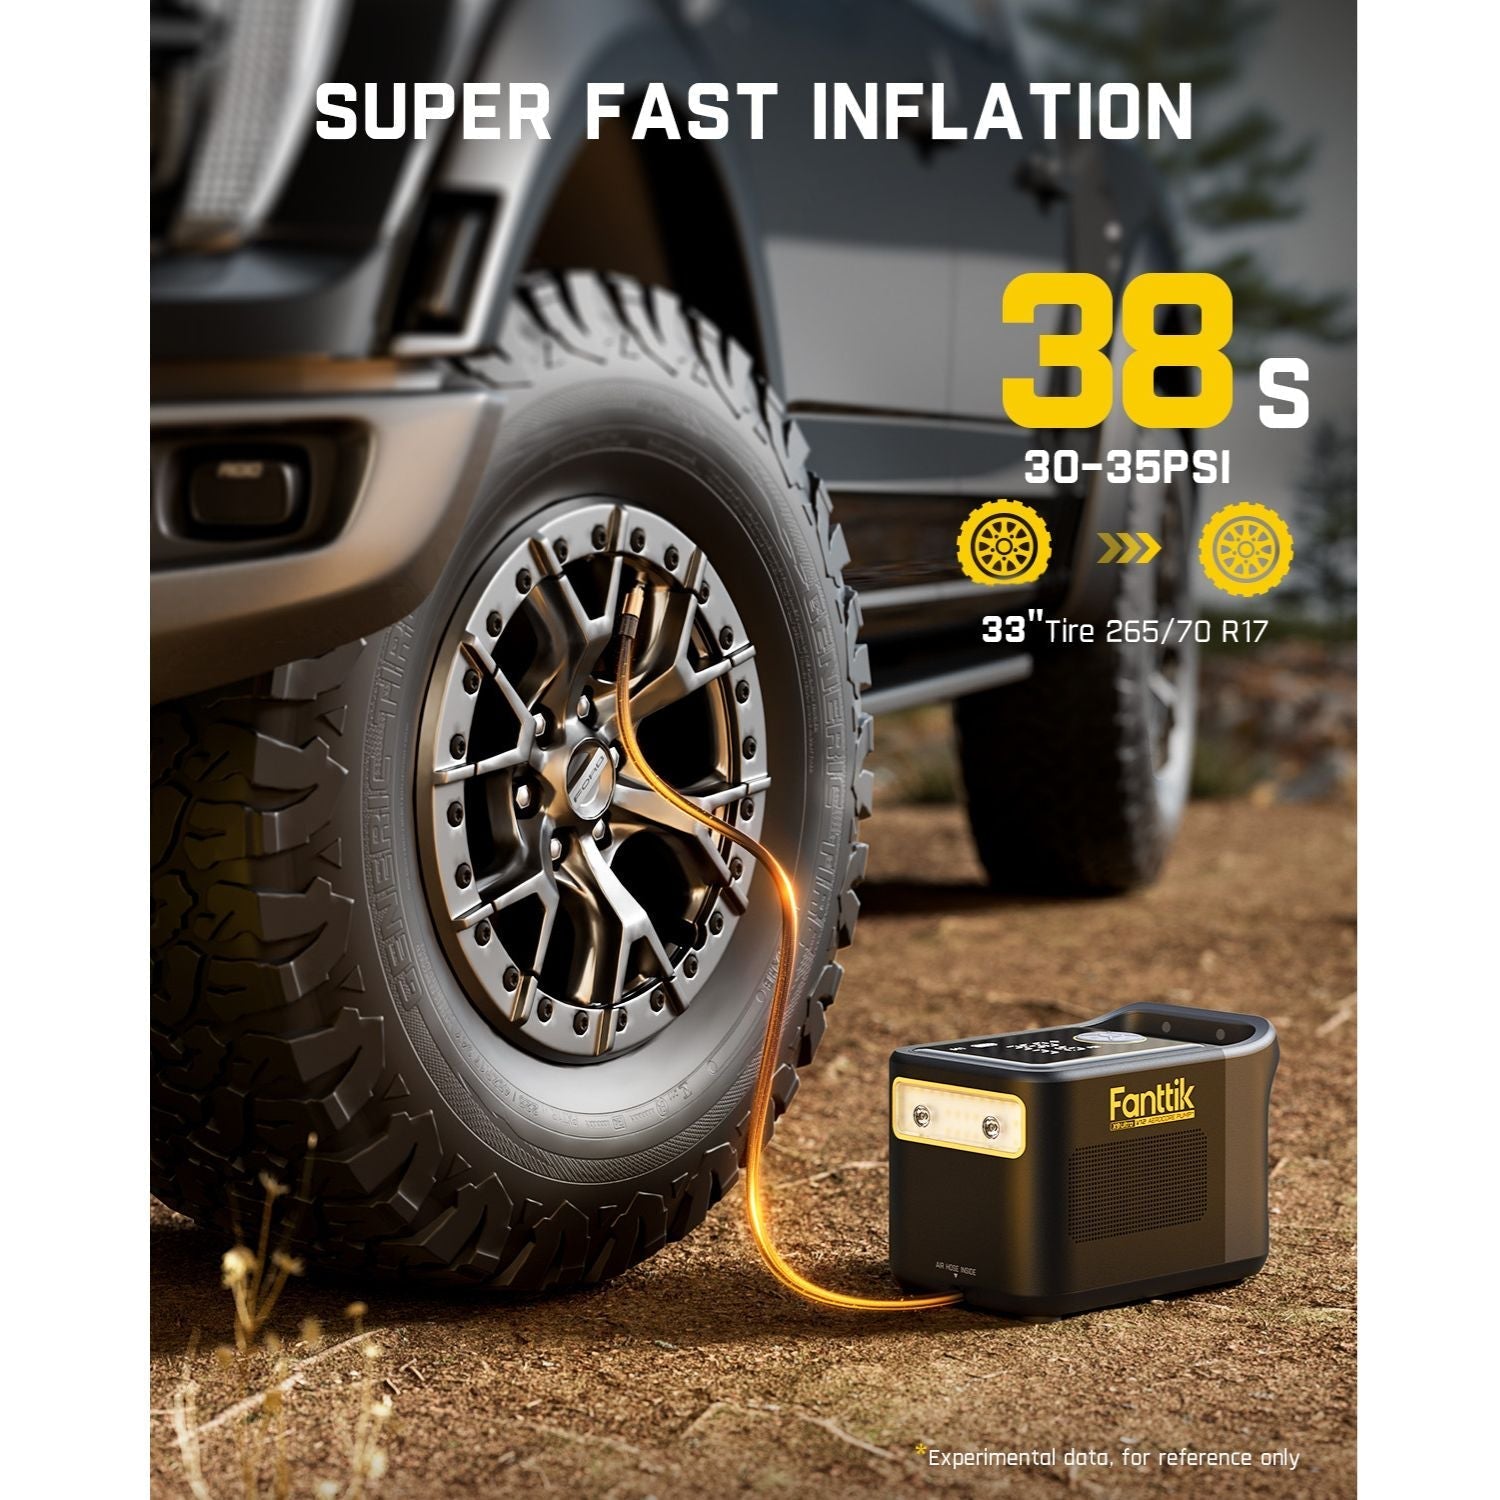 Fanttik X9 Ultra™ Portable Tire Inflator for Pickup Trucks | 3-in-1 Air Pump, Power Station, Flashlight | 6× Faster Inflator with Digital Gauge | Air Compressor for Cybertruck, SUV, EV, Compact Car